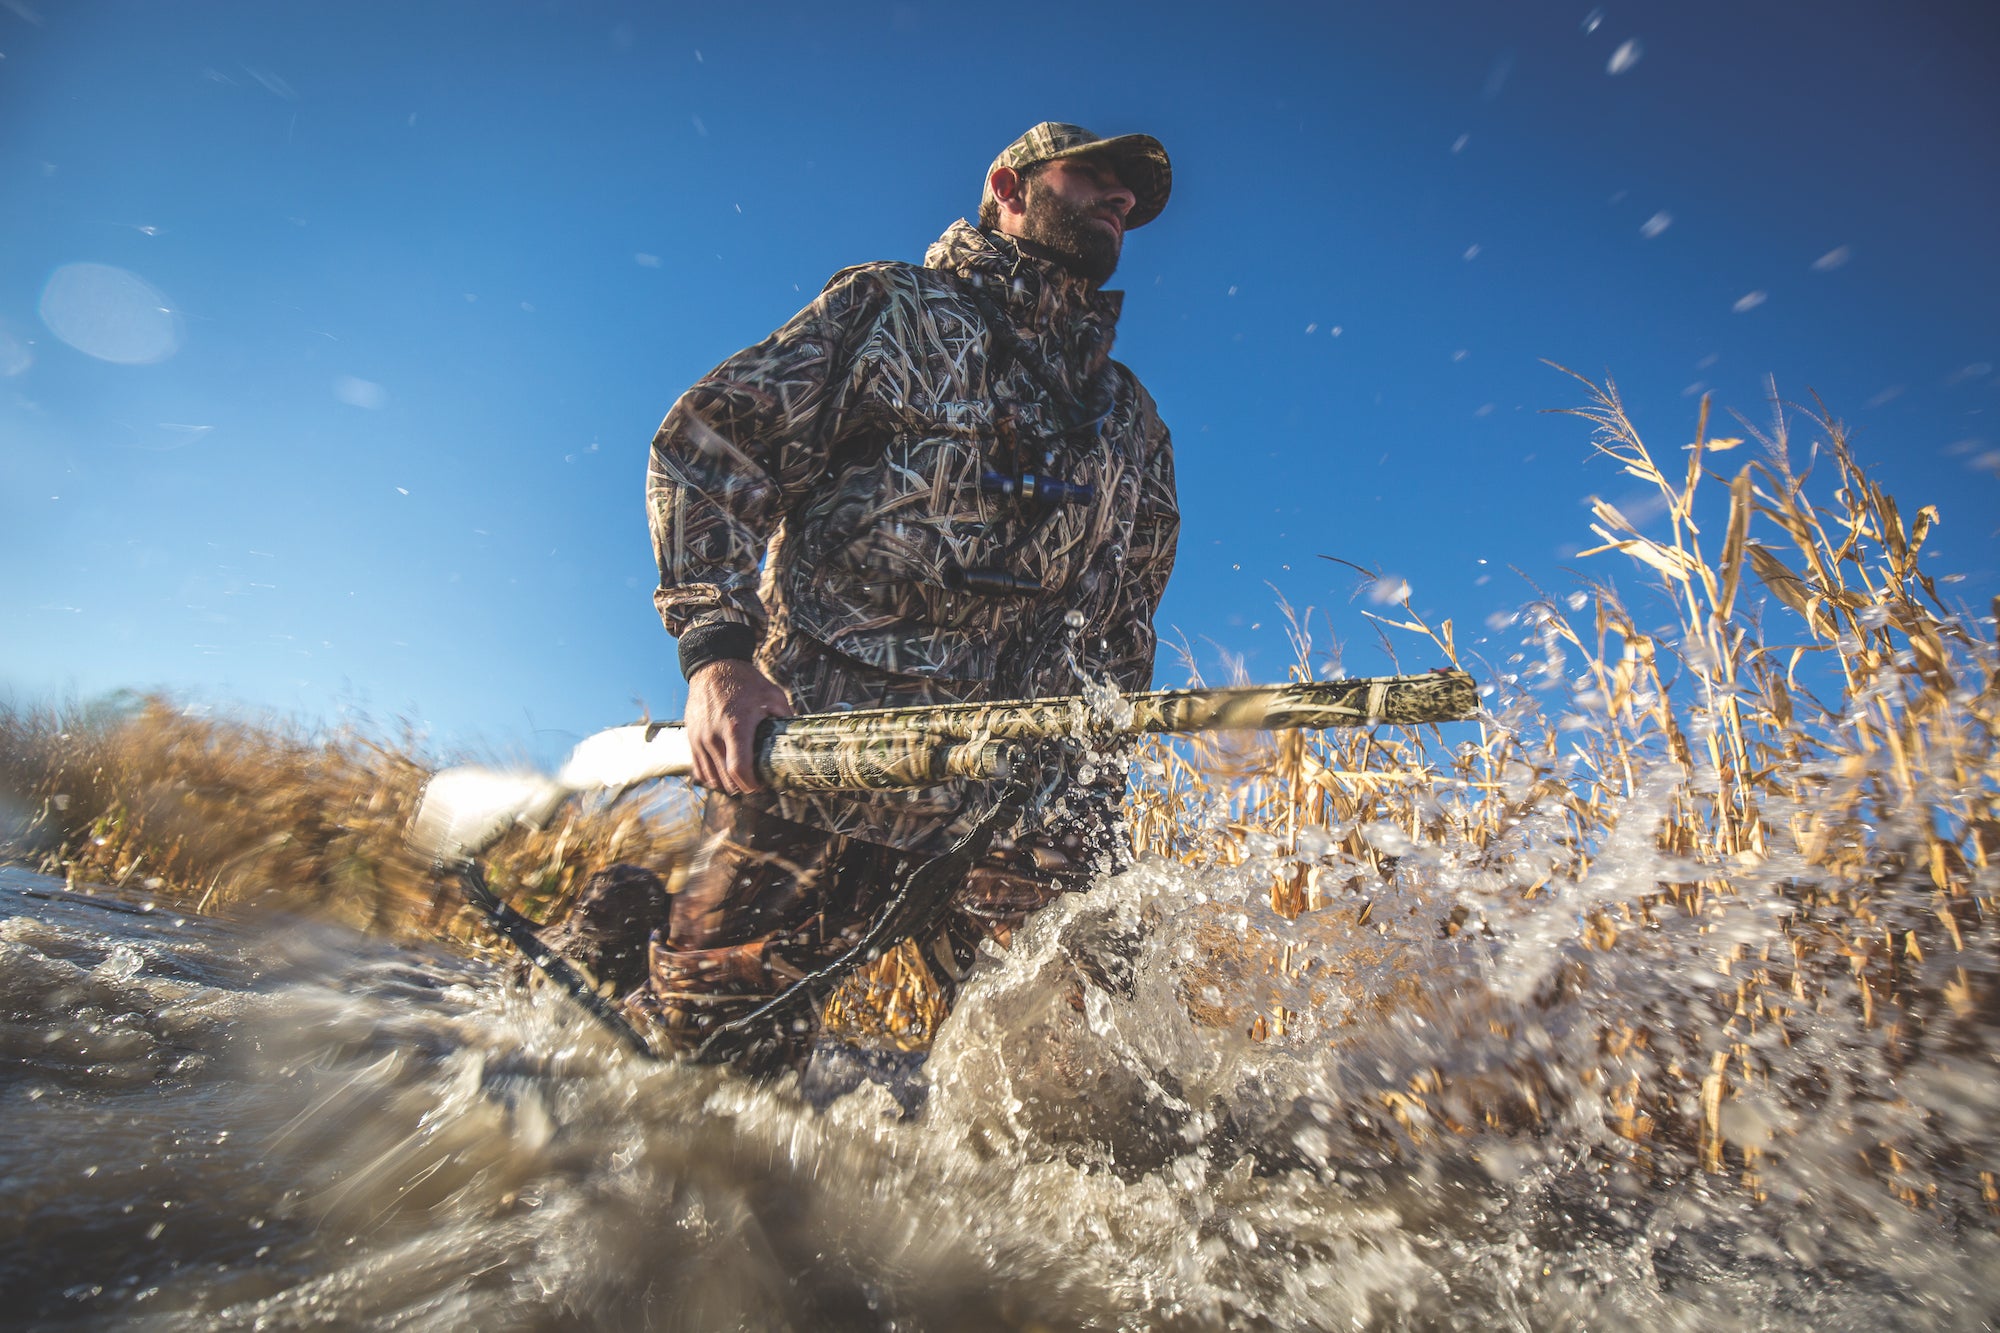 hunter carrying a mossberg 500 in a duck marsh.